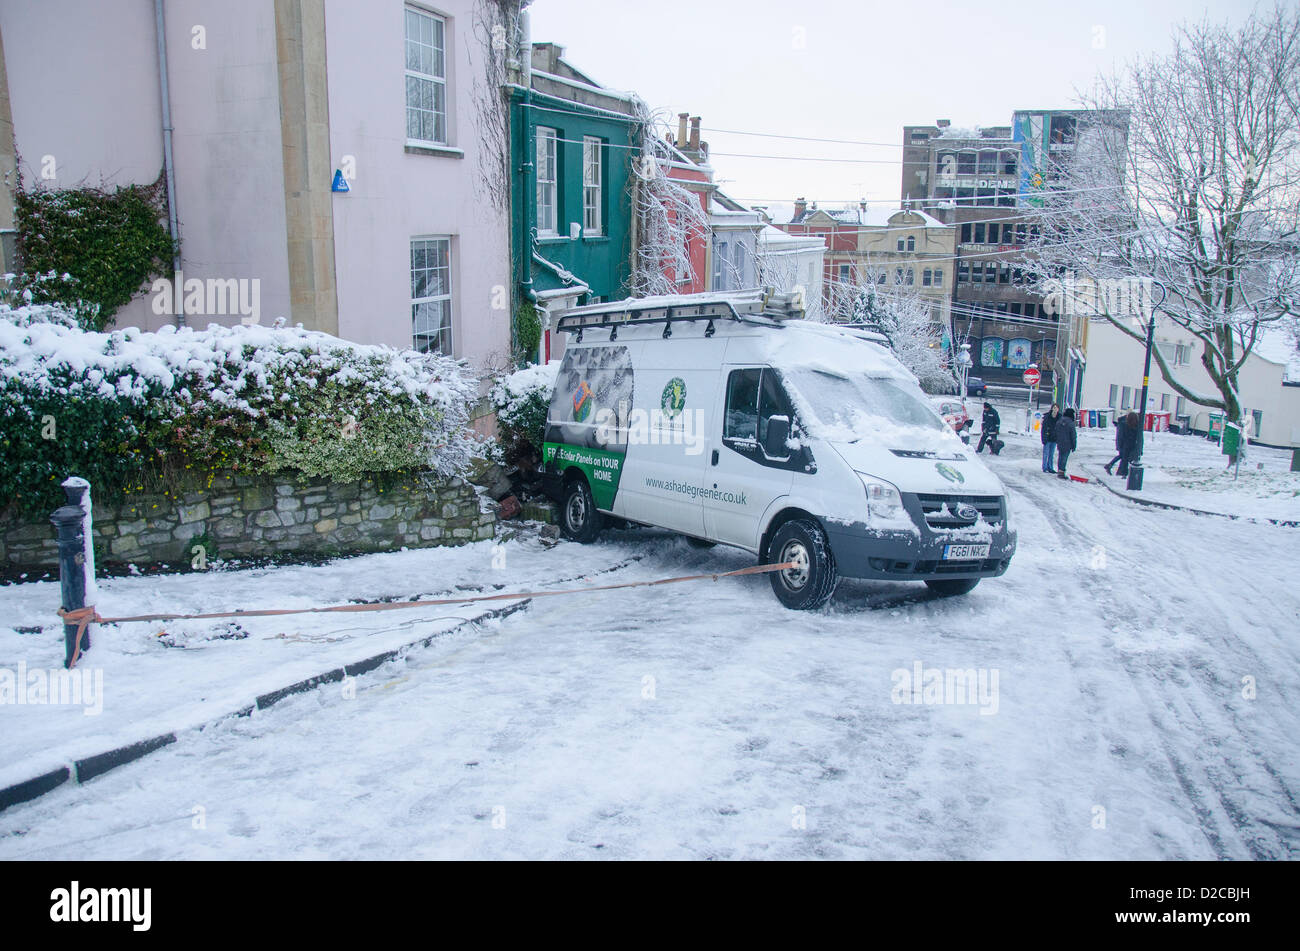 Nine Tree Hill, Bristol, UK, Friday 18th January 2013. Van crashed into wall and has been secured with rope. Alamy Live News Stock Photo